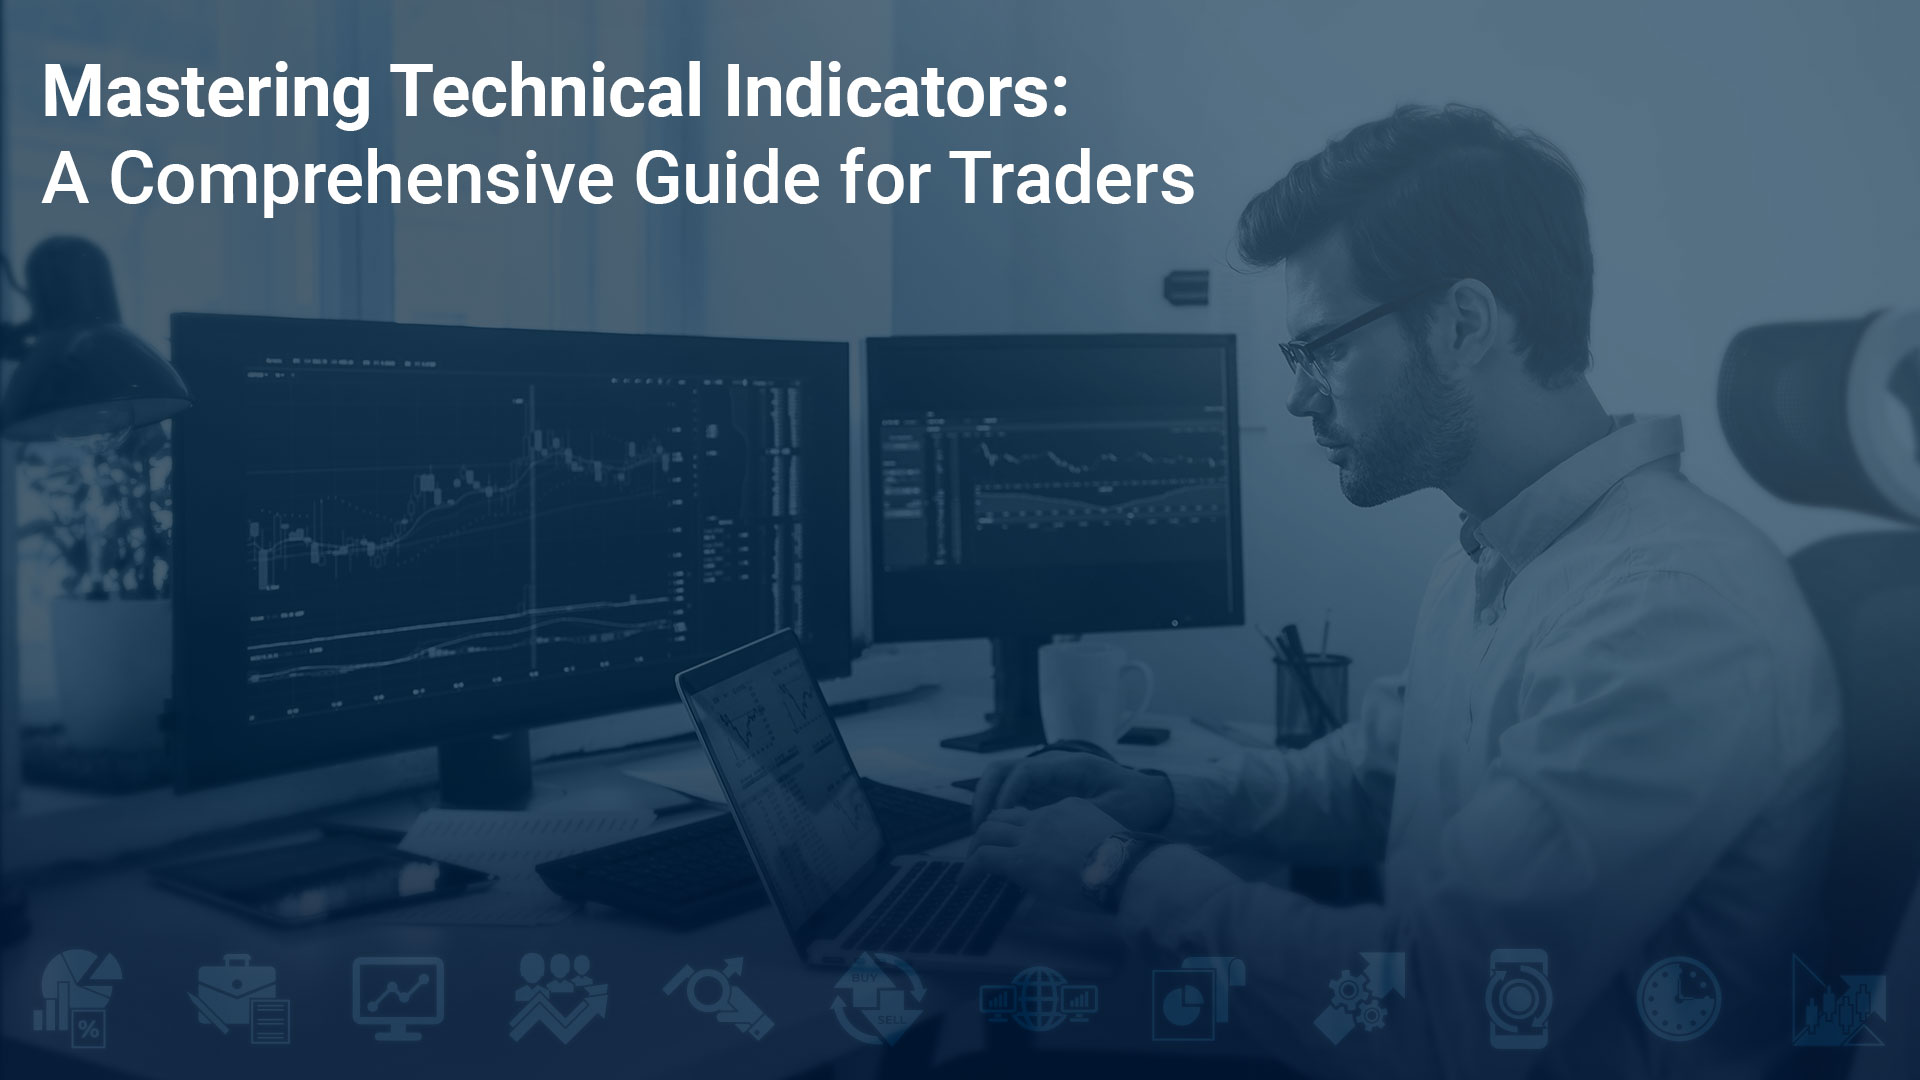 Mastering Technical Indicators: A Comprehensive Guide for Traders